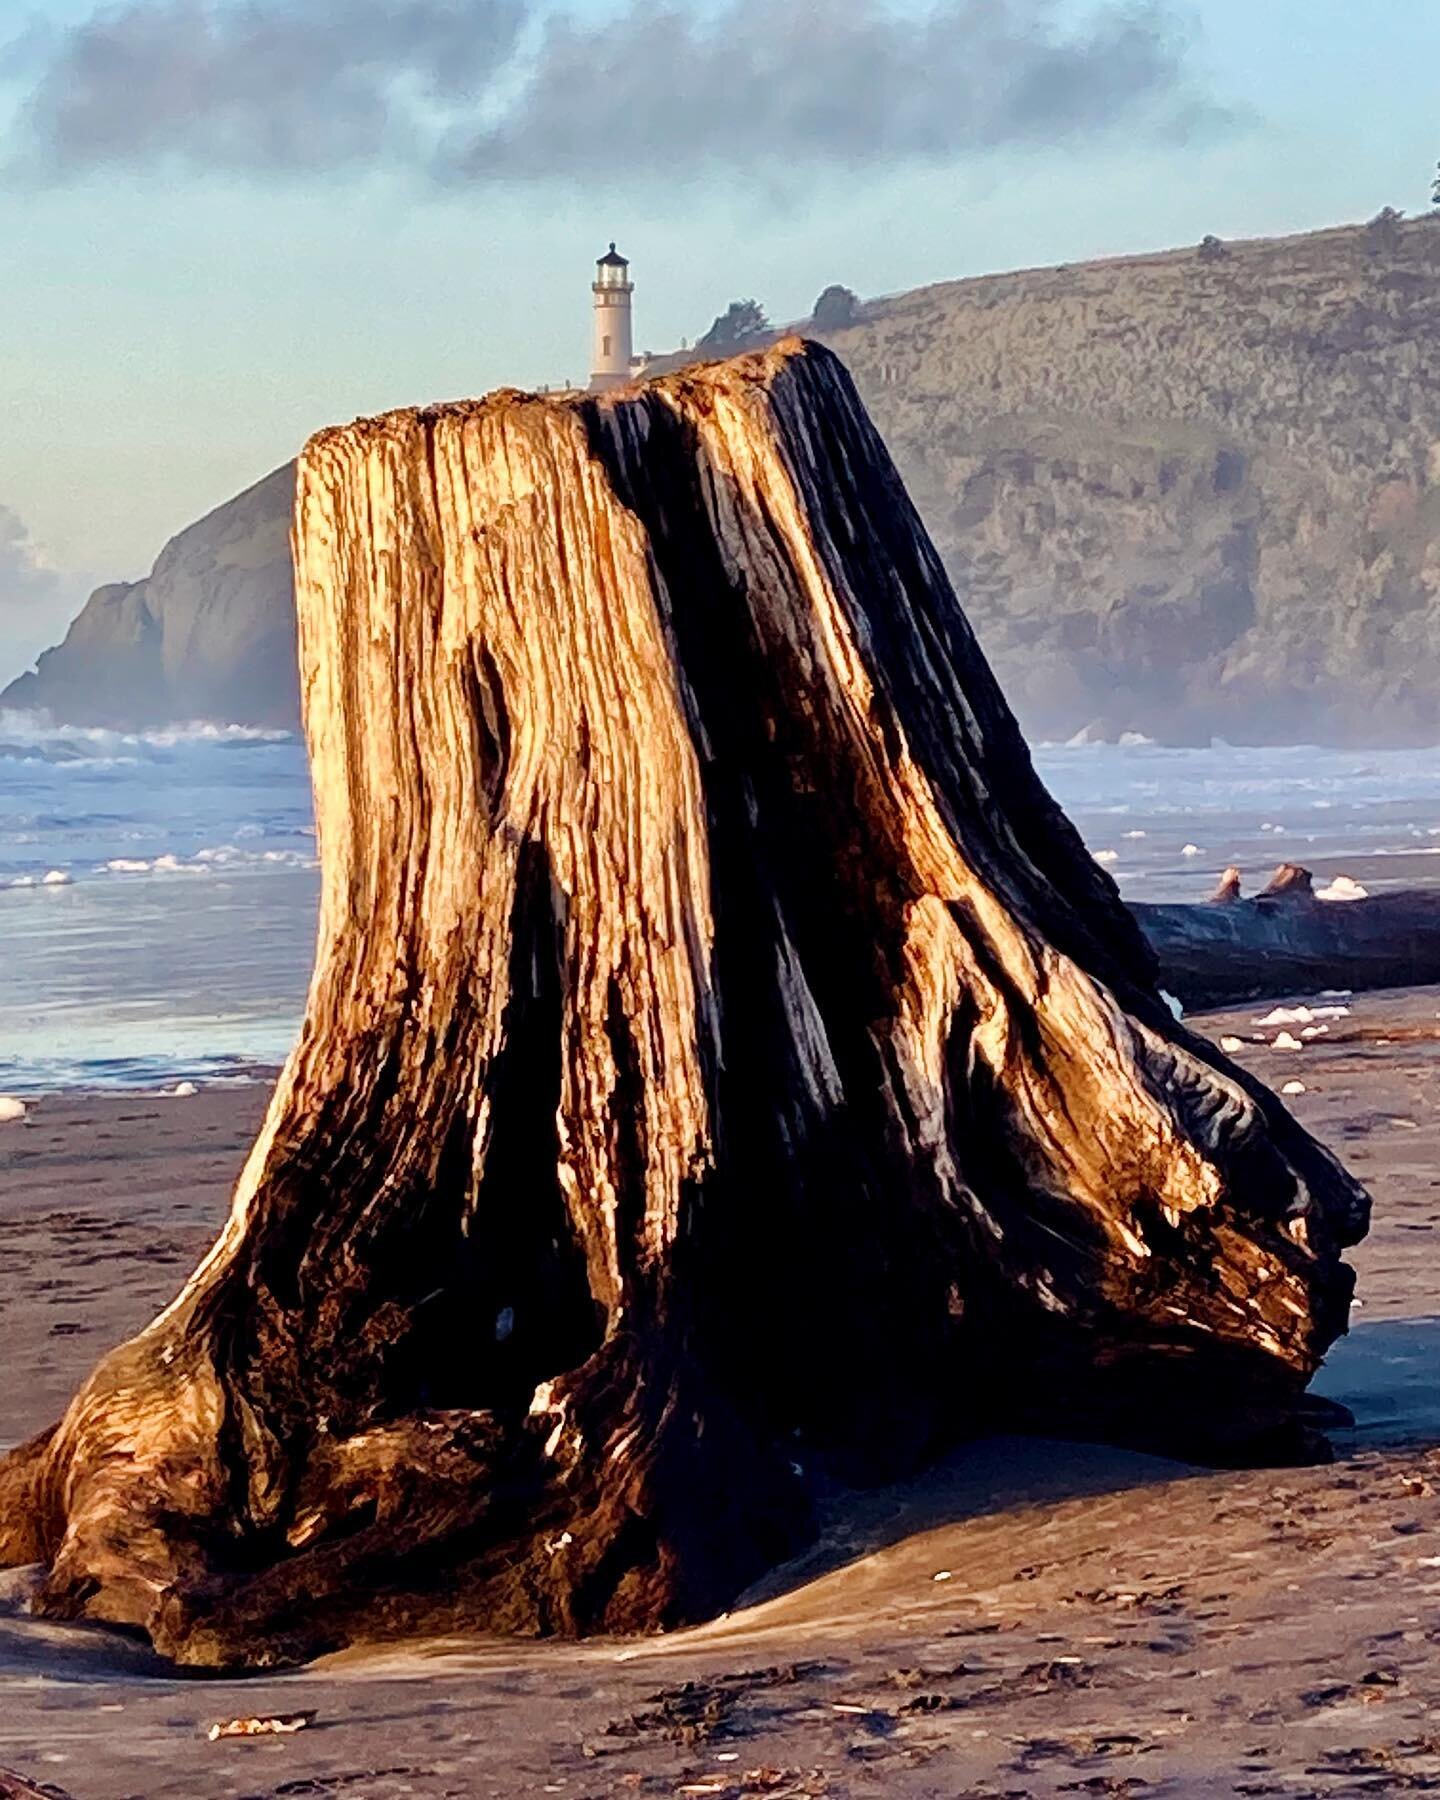 Check out the miniature lighthouse on top of the stump on Benson Beach!